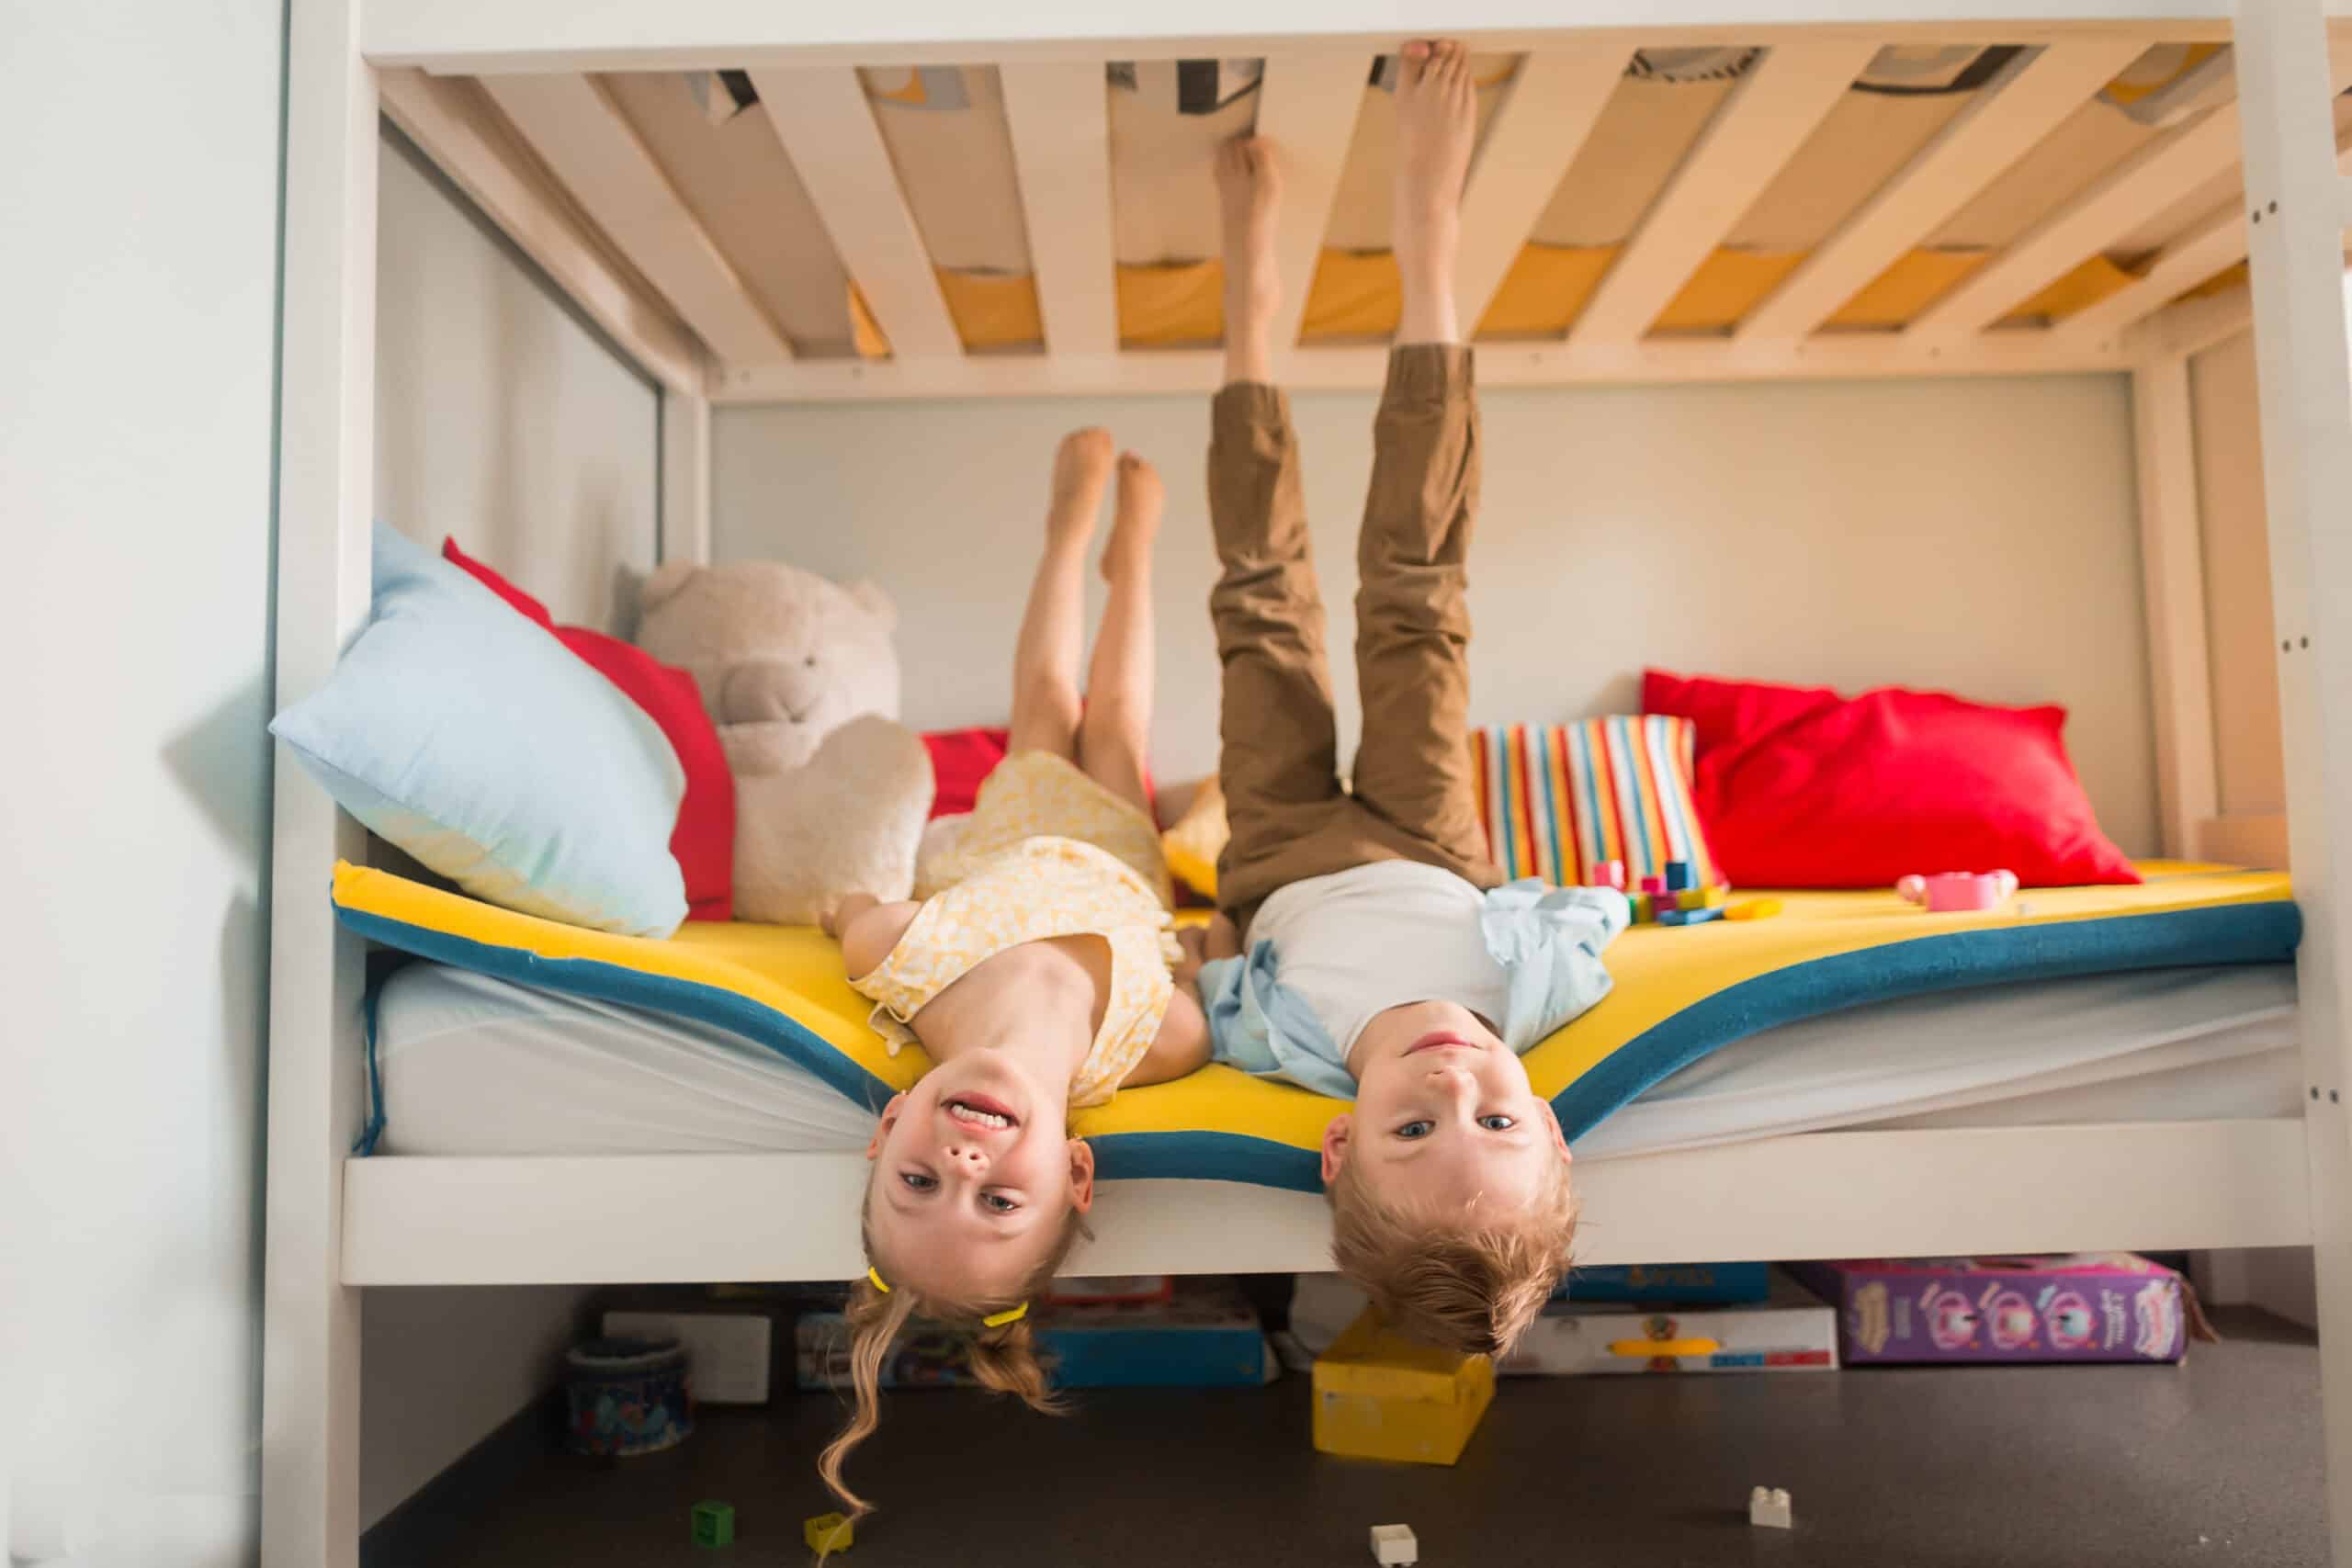 Kids laying in a bunk bed